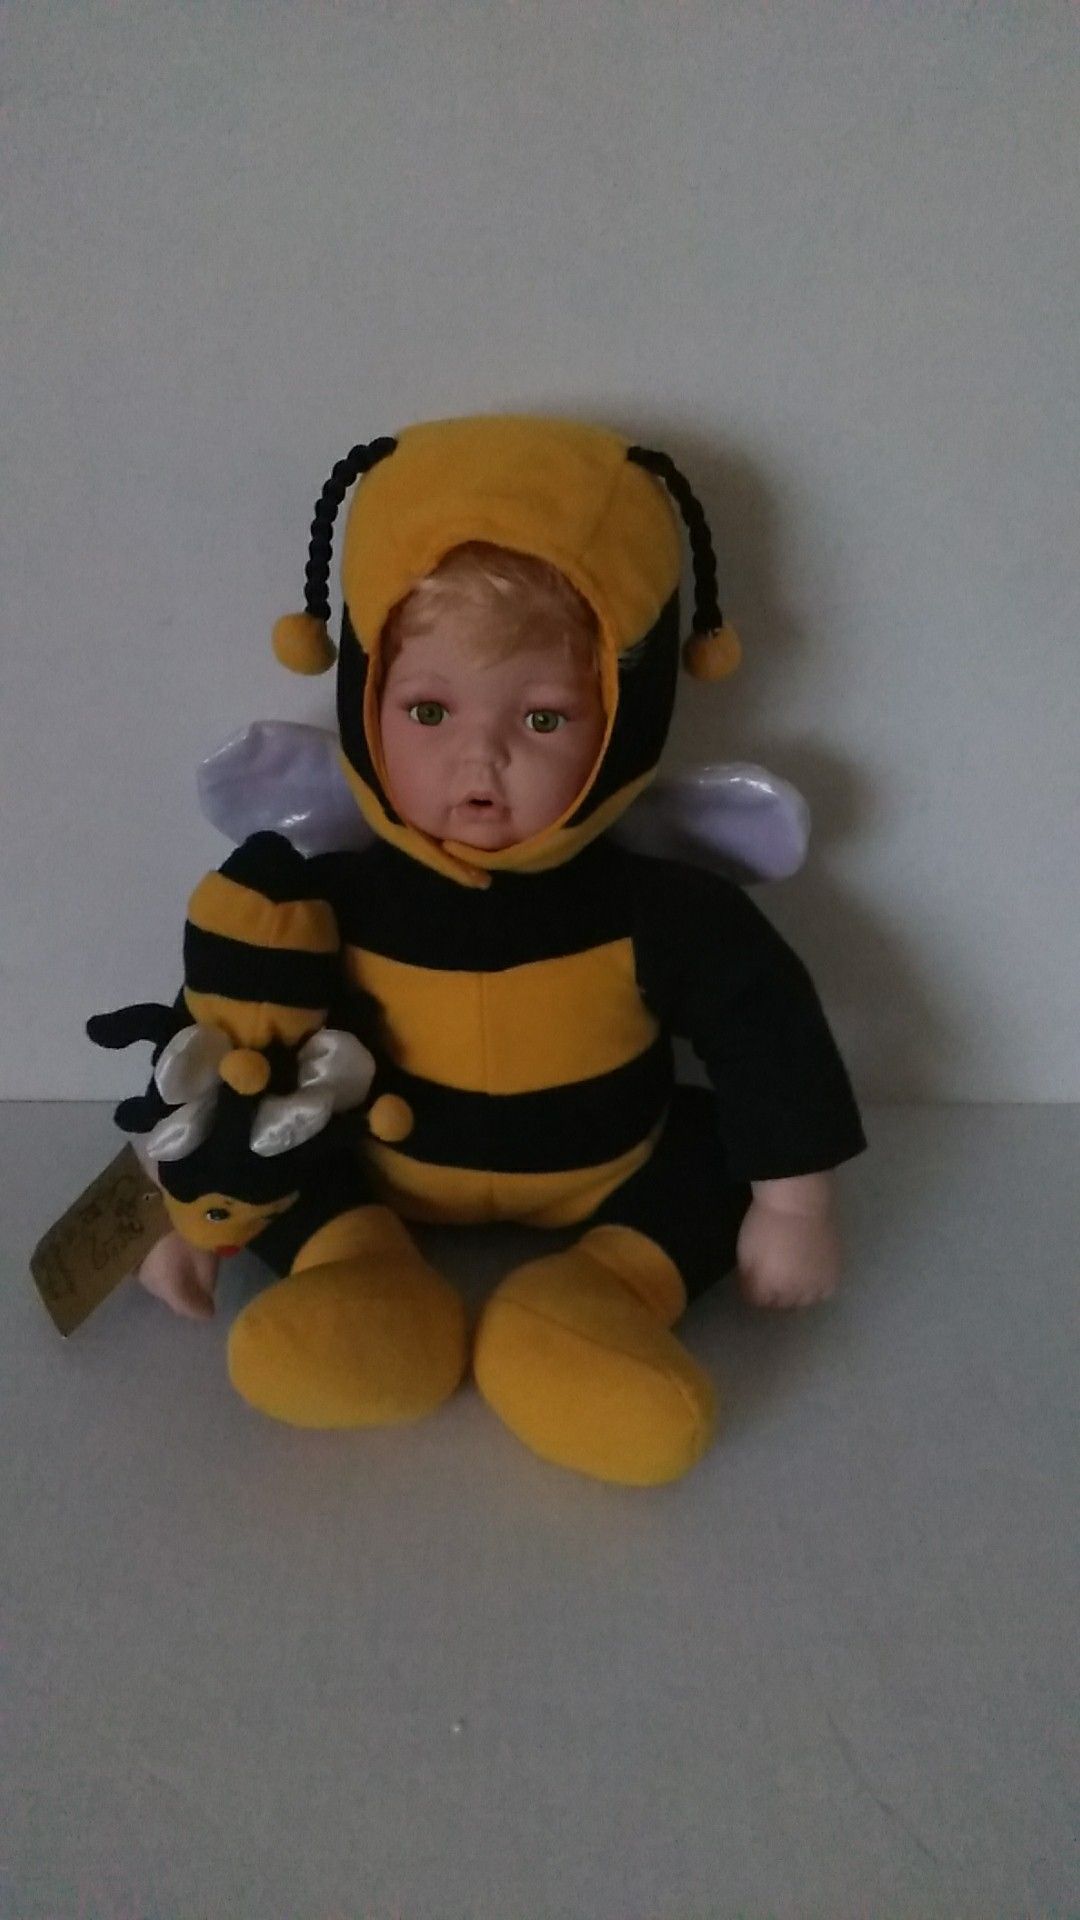 BUMBLEBEE PORCELAIN DOLL FROM THE BROADWAY COLLECTION